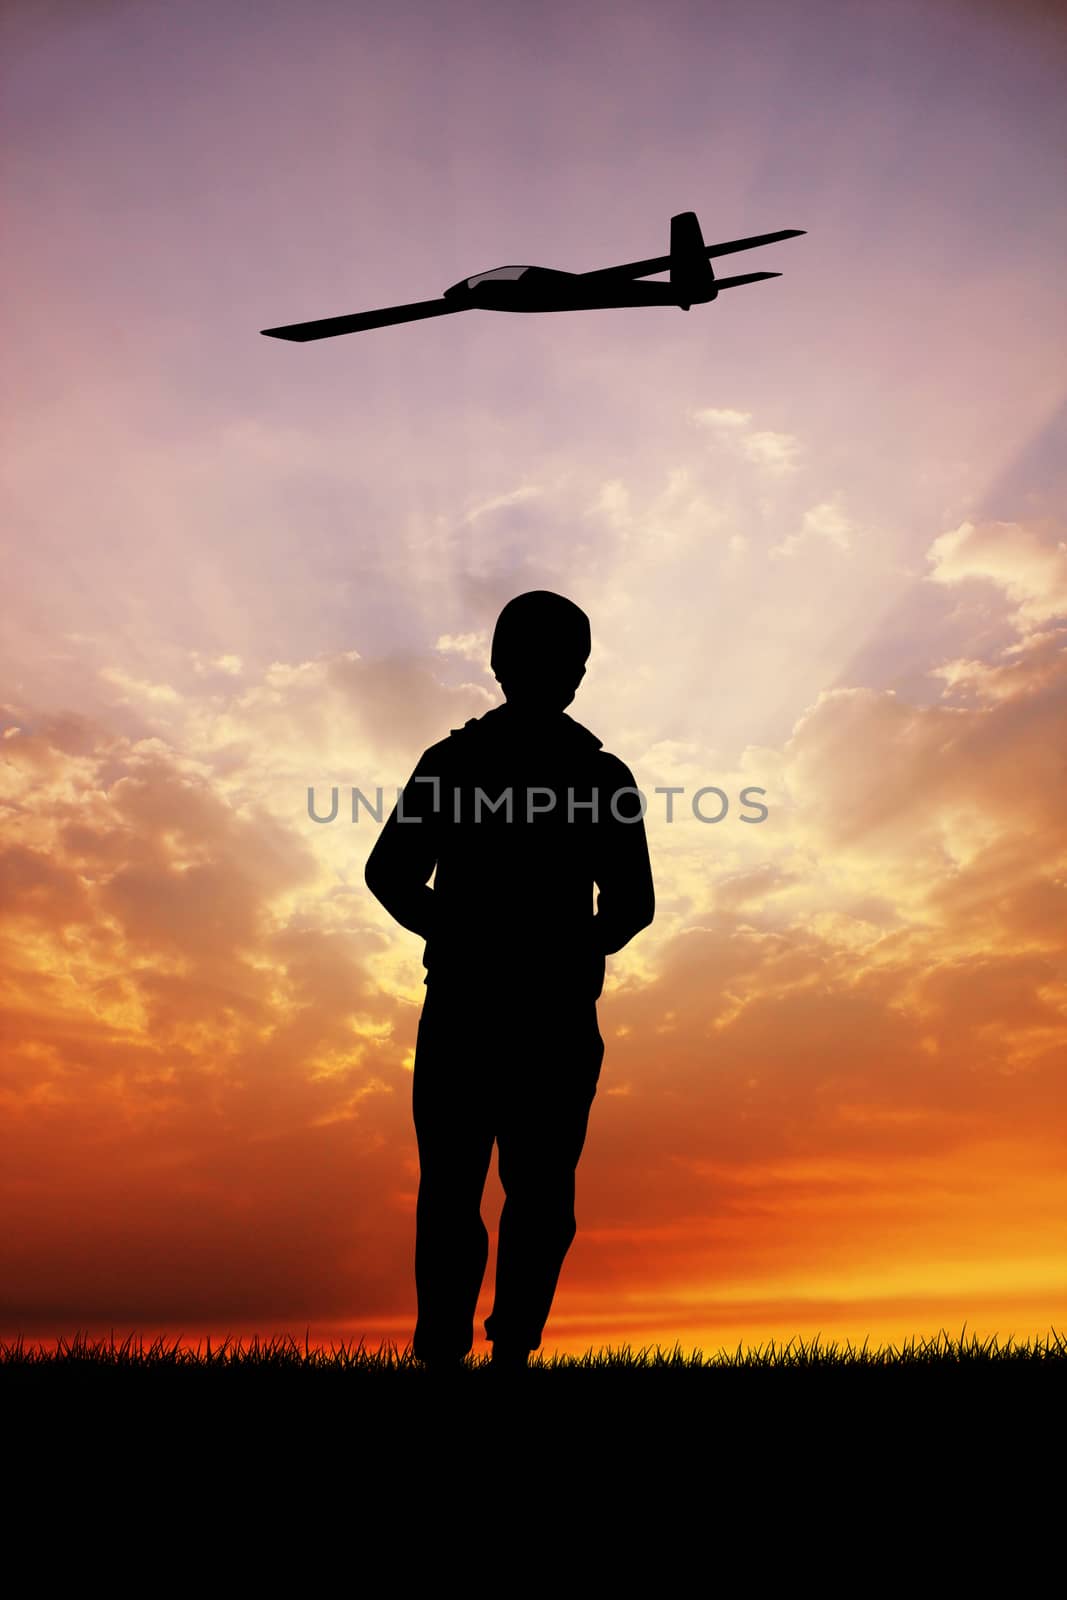 illustration of remote controlled airplanes at sunset